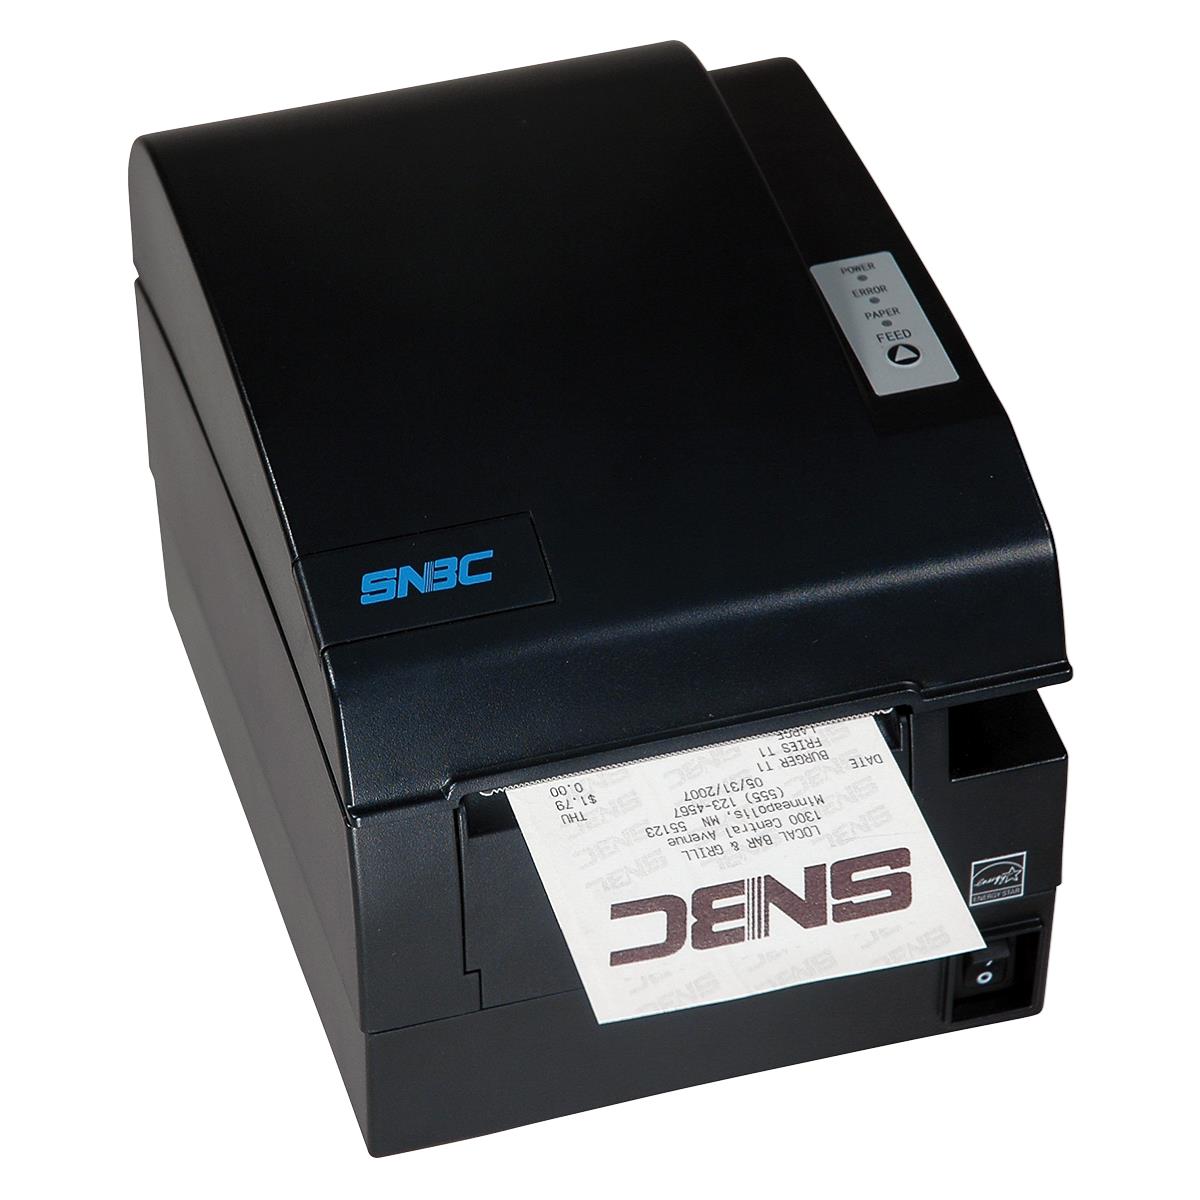 A black snbc thermal receipt printer with a printed receipt emerging from its slot.